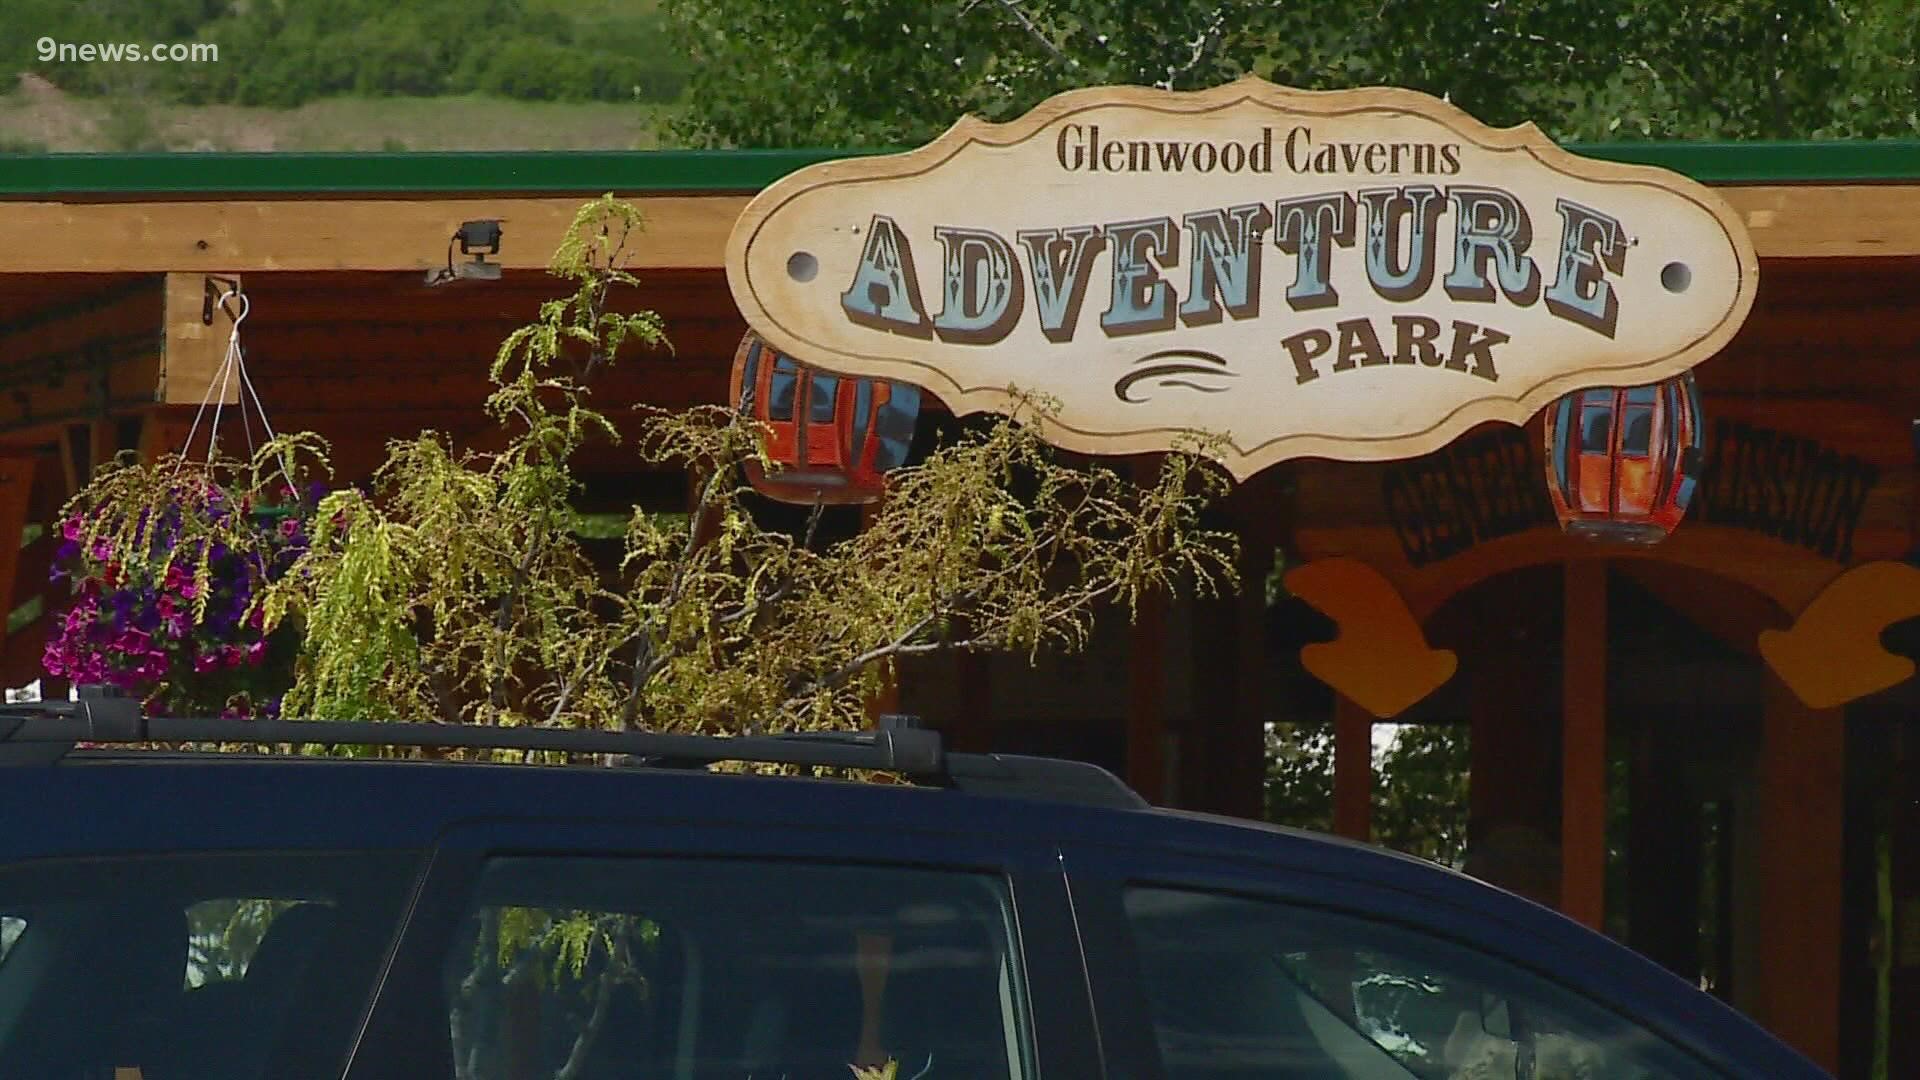 We're learning of prior incidents at Glenwood Caverns resulting in injury. We speak to our legal analyst to learn about waivers and rights of patrons.